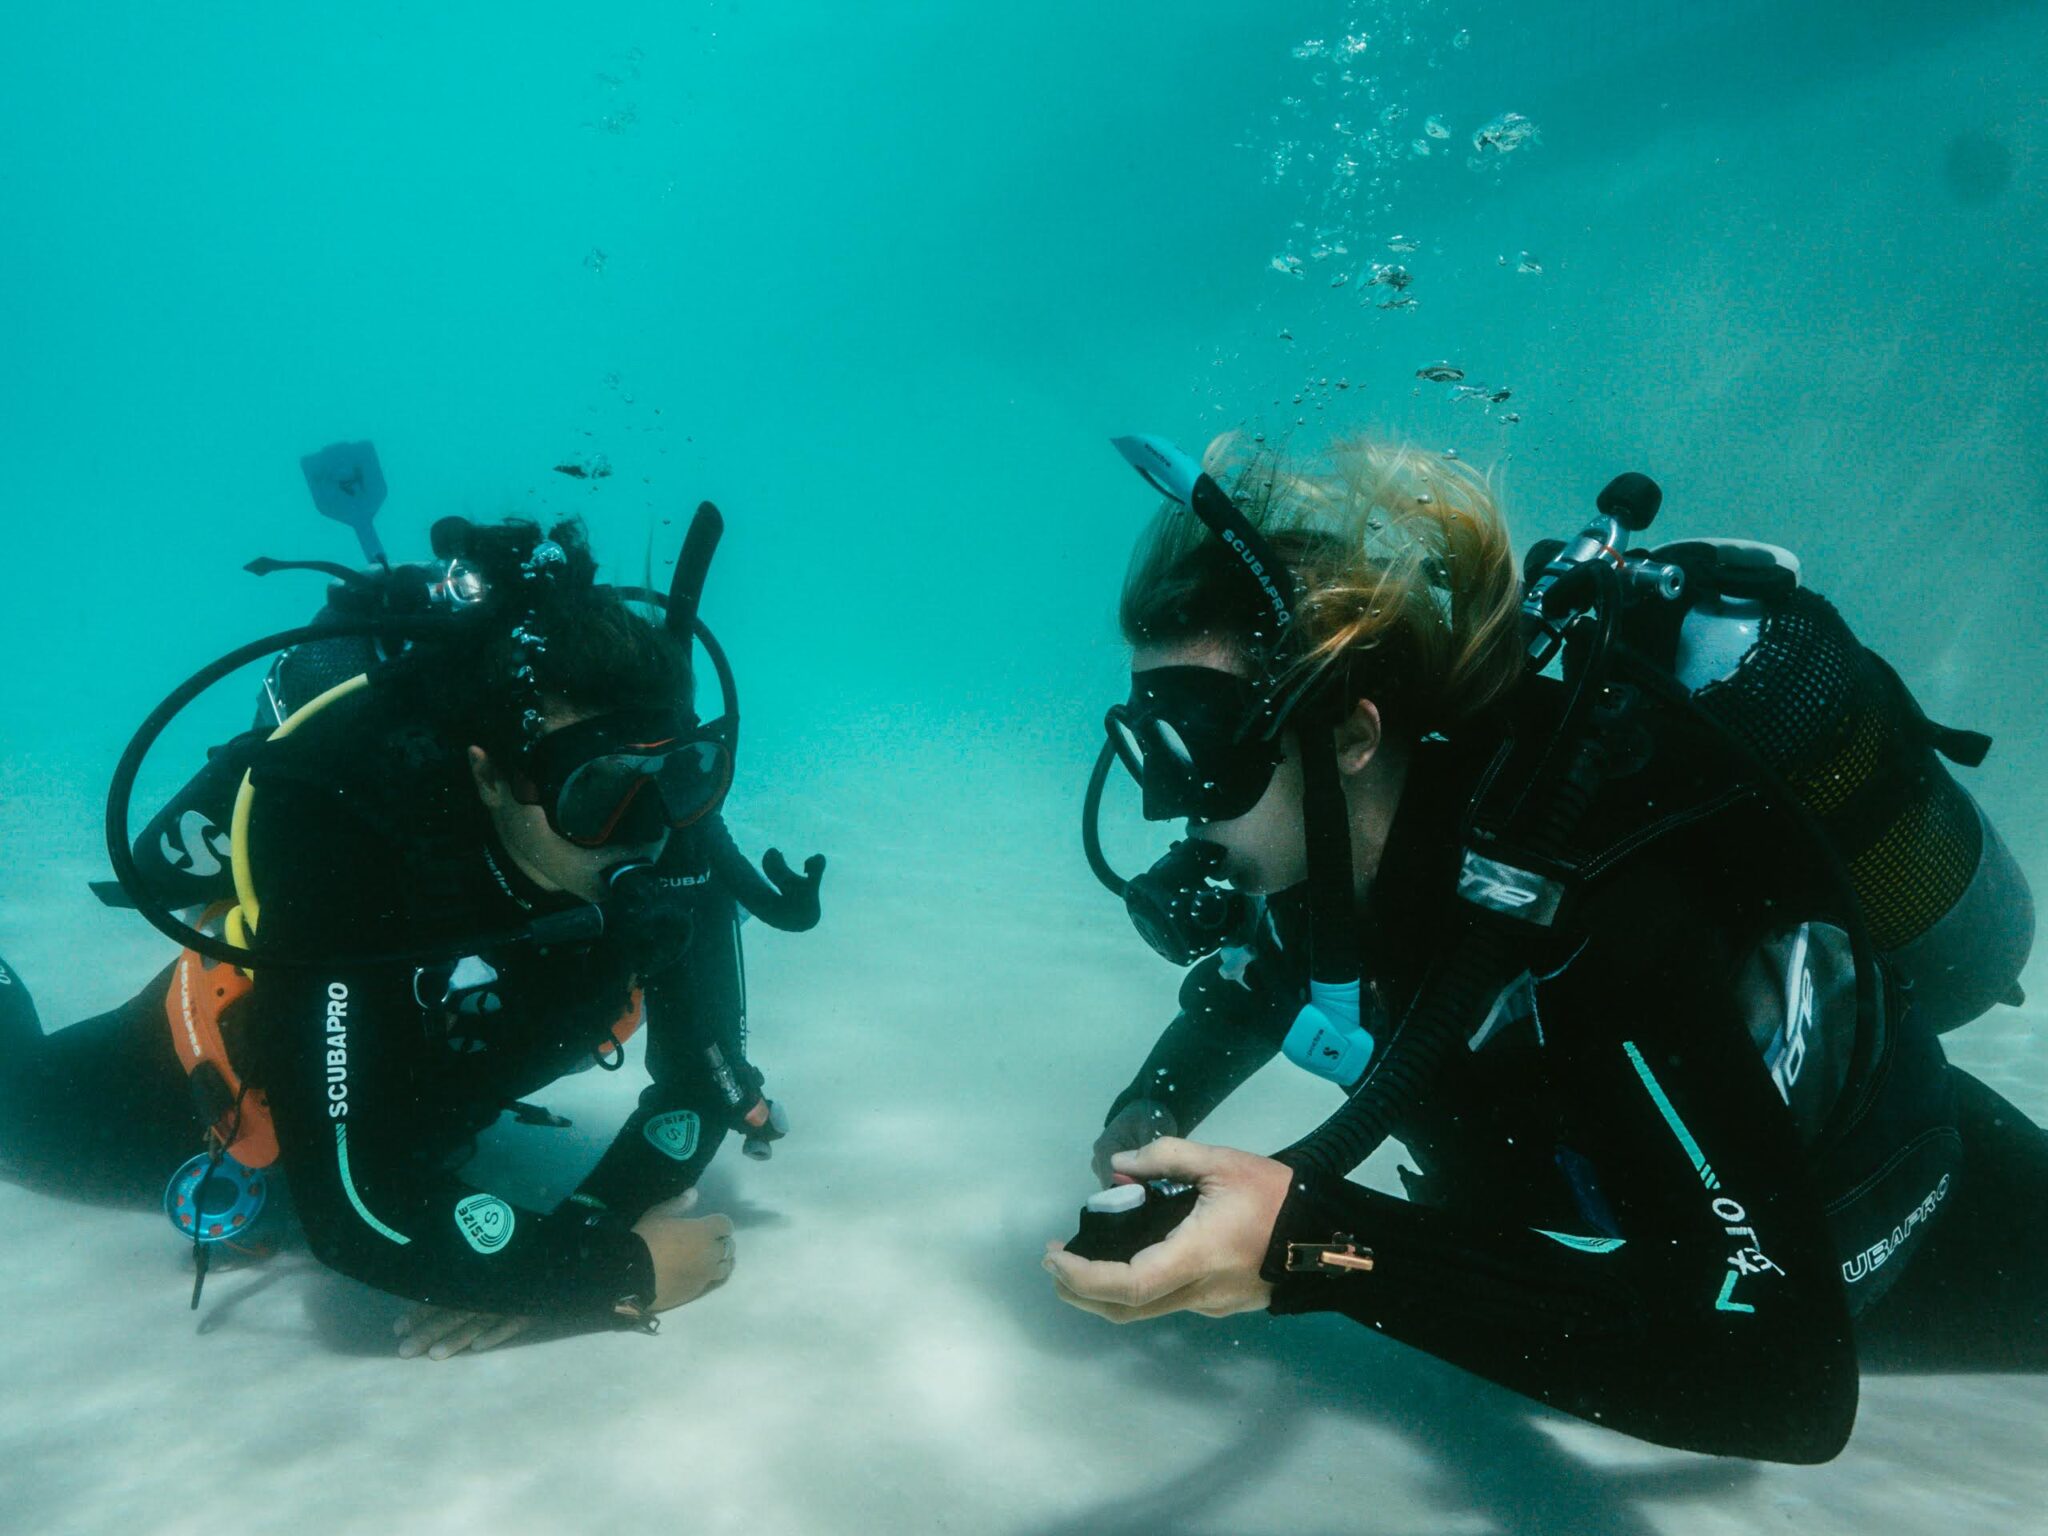 two scuba divers practice their skills underwater in a swimming pool